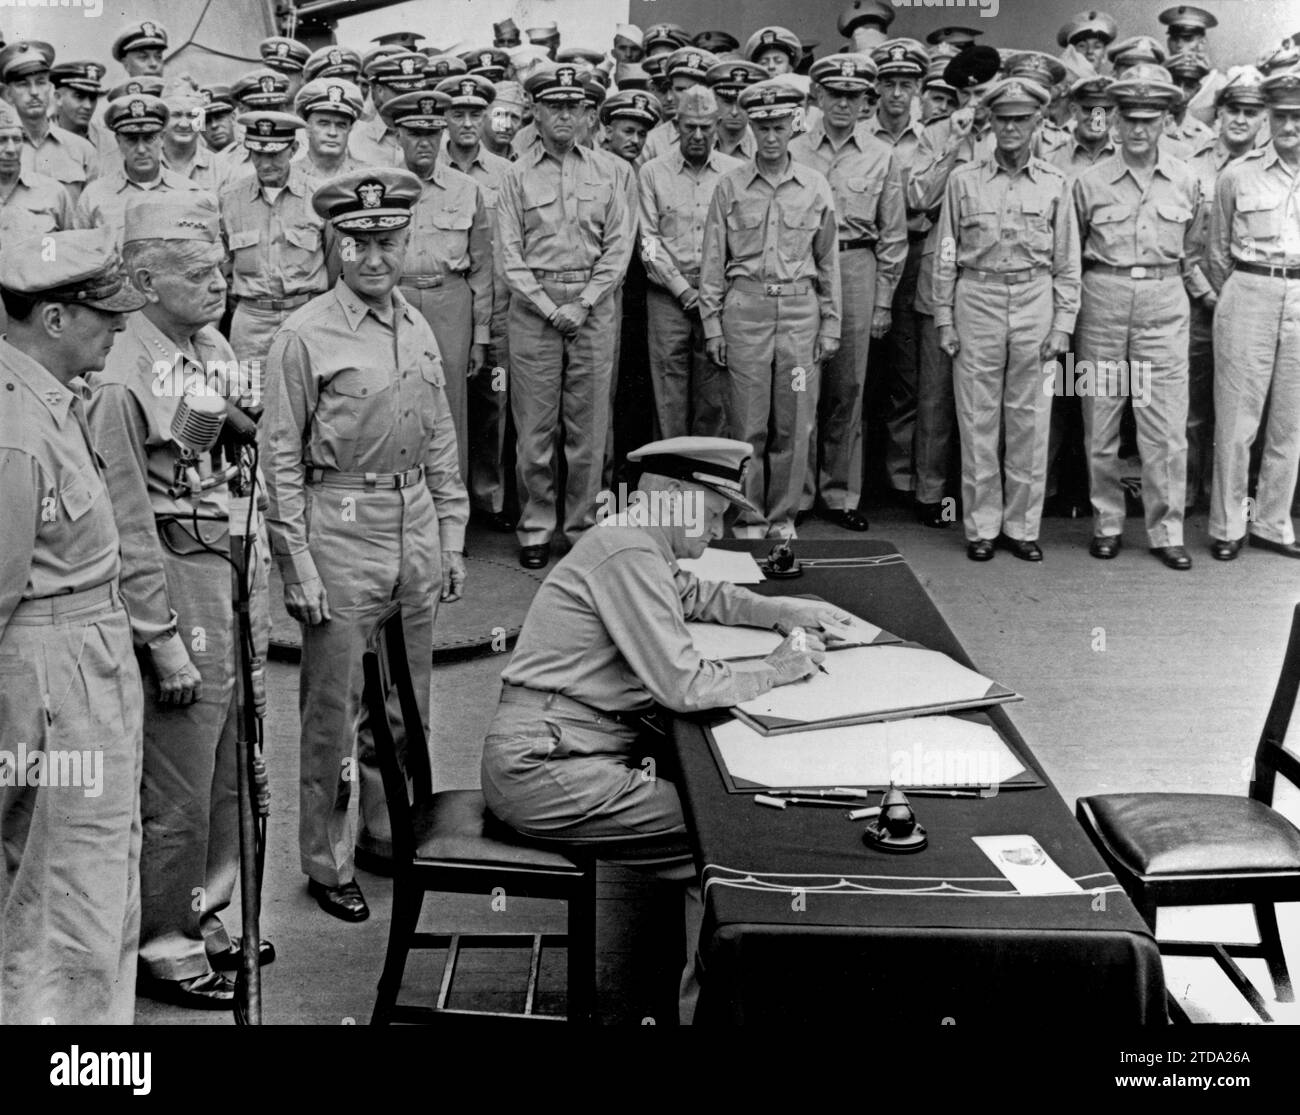 TOKYO, JAPAN - 02 September 1945 - US Navy Fleet Admiral Chester W Nimitz signs the Instrument of Surrender of Japan as United States Representative a Stock Photo